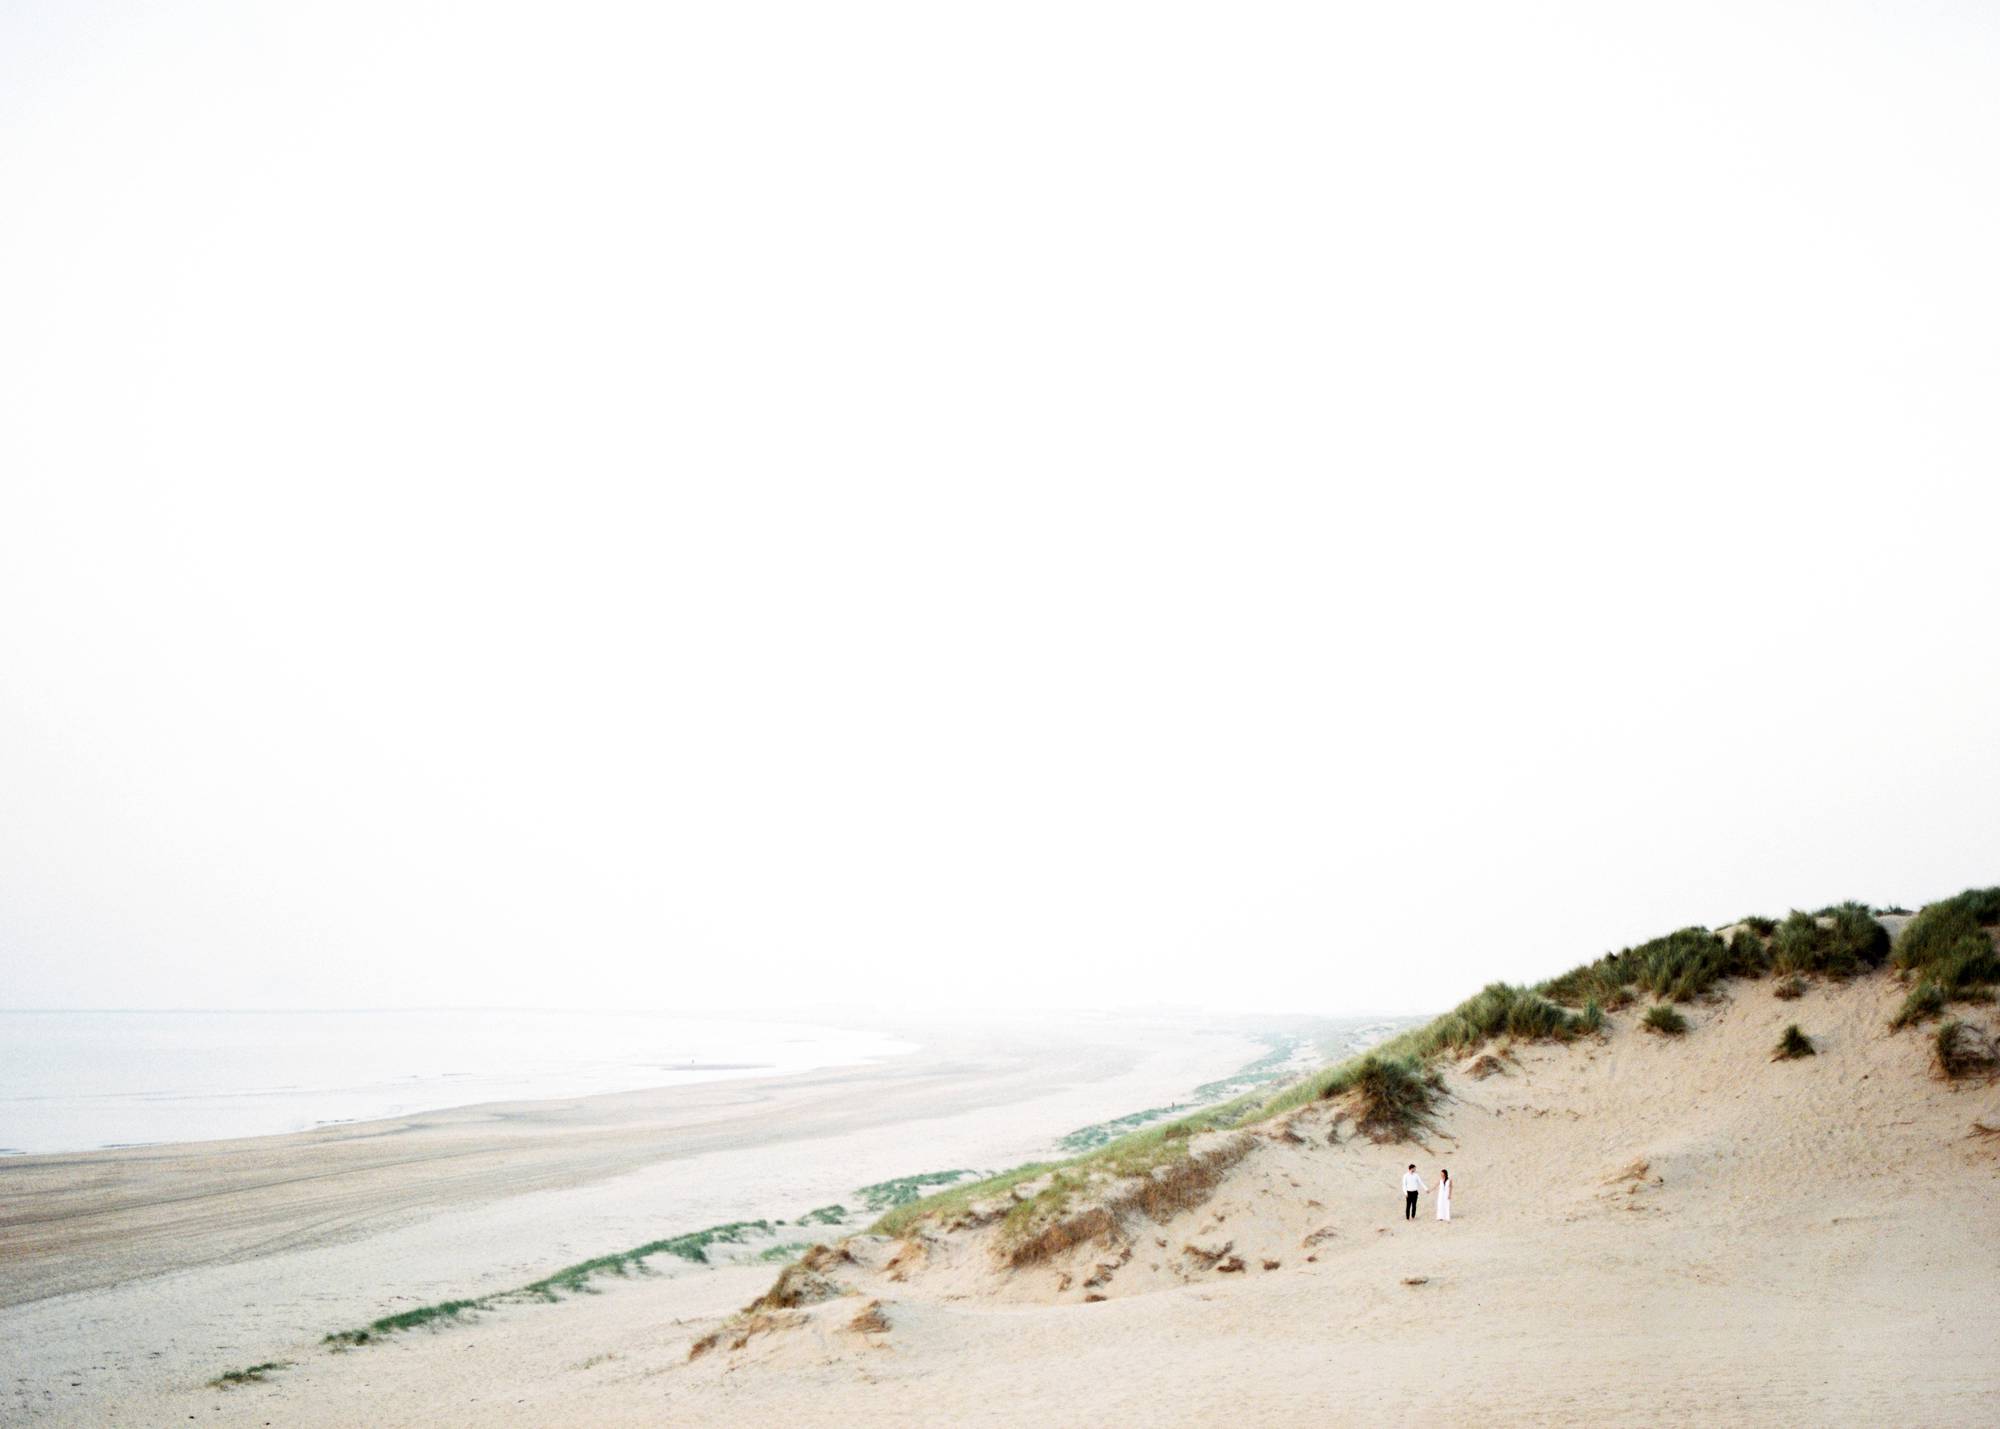 7 locations to host the perfect beach wedding - Parnassia / Bloemendaal in The Netherlands